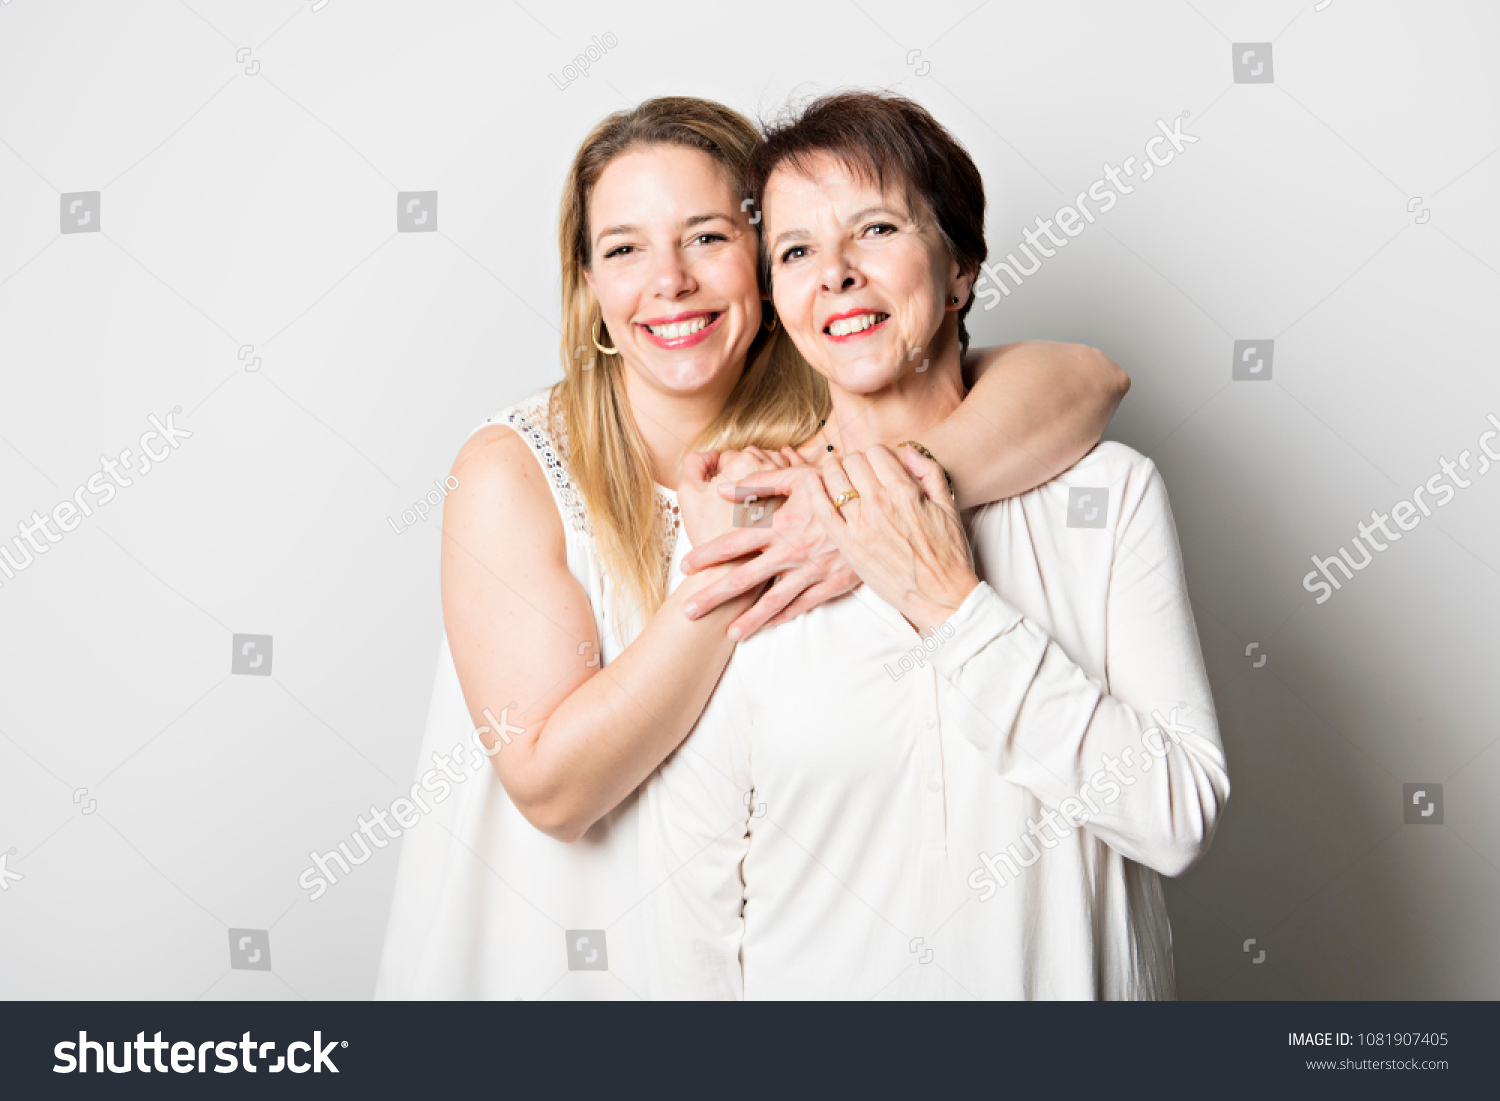 Senior mother with 40 years old daughter #1081907405